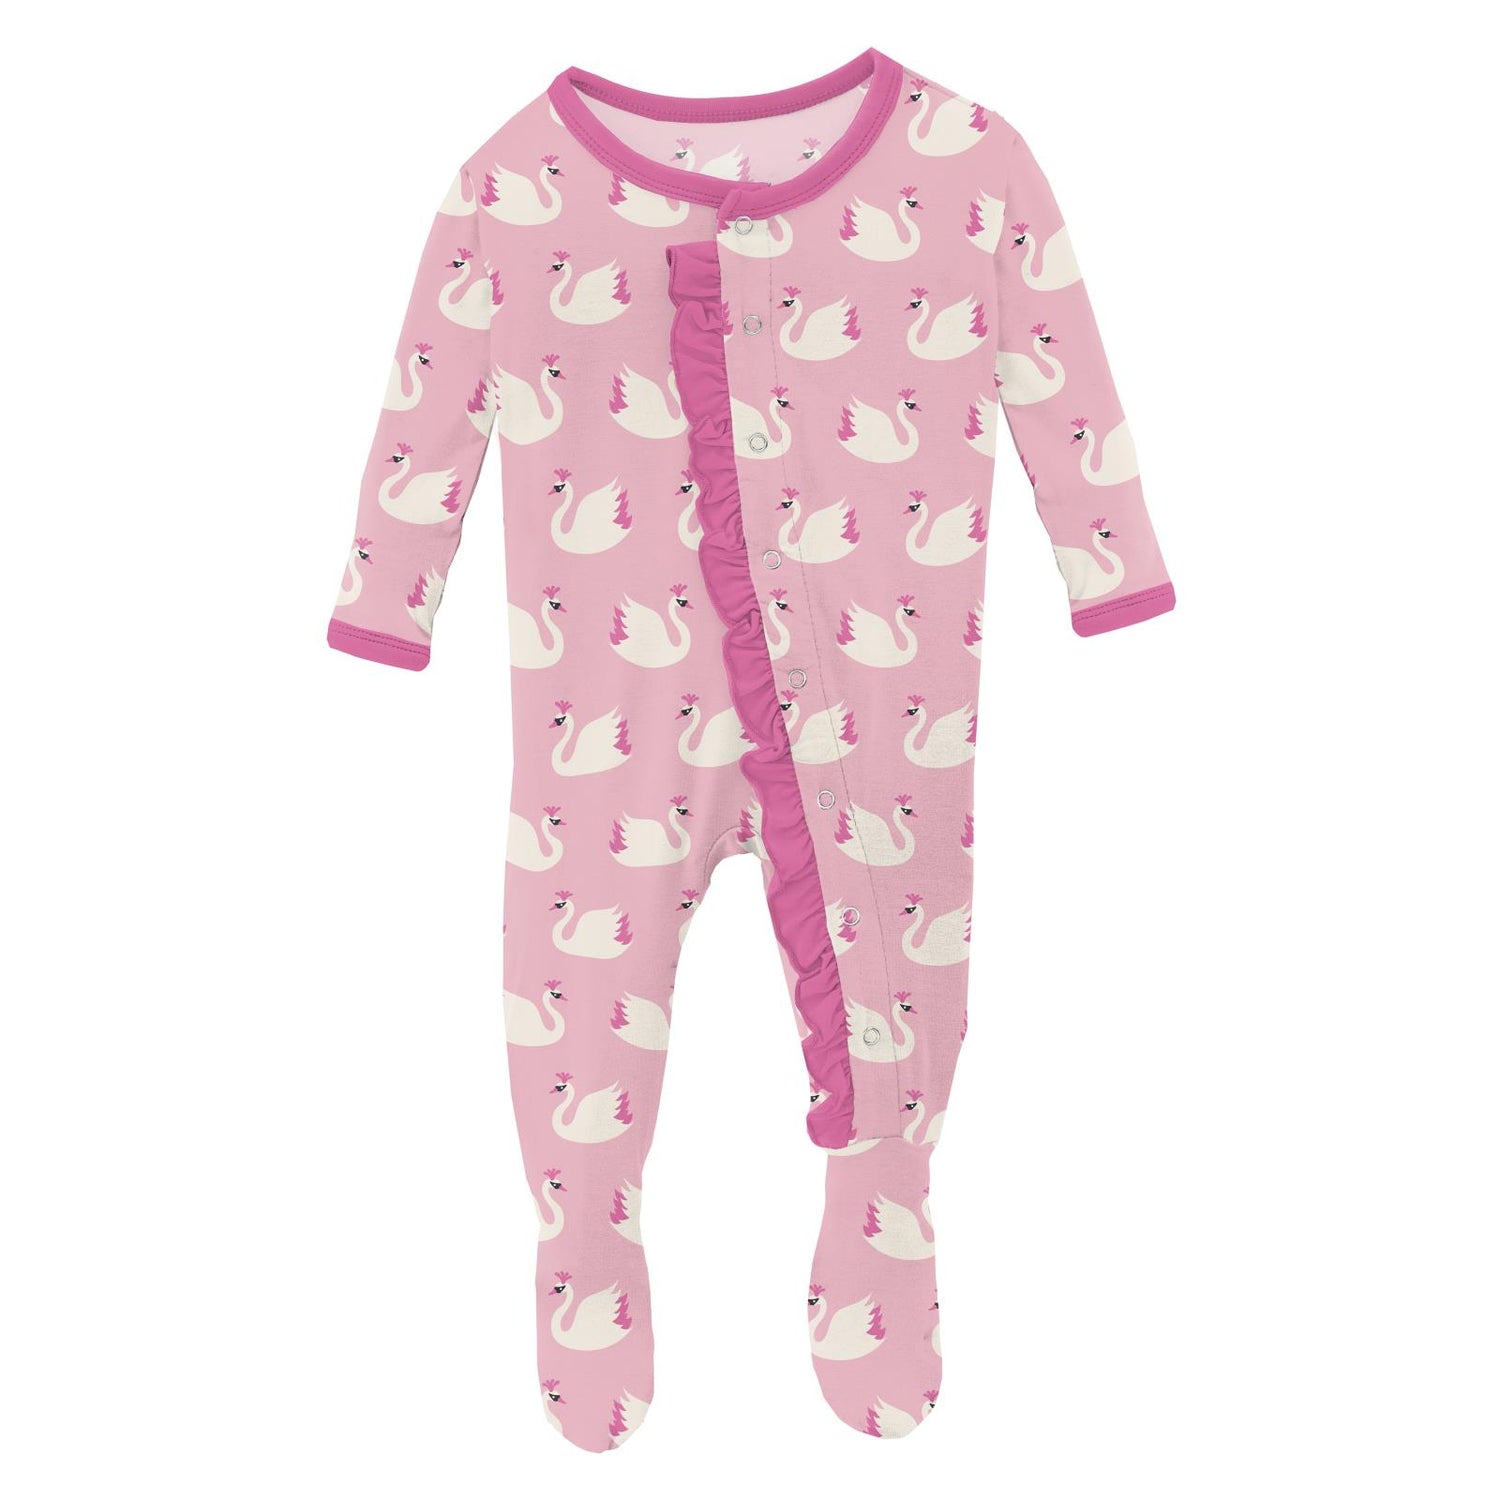 Print Classic Ruffle Footie with Snaps in Cake Pop Swan Princess